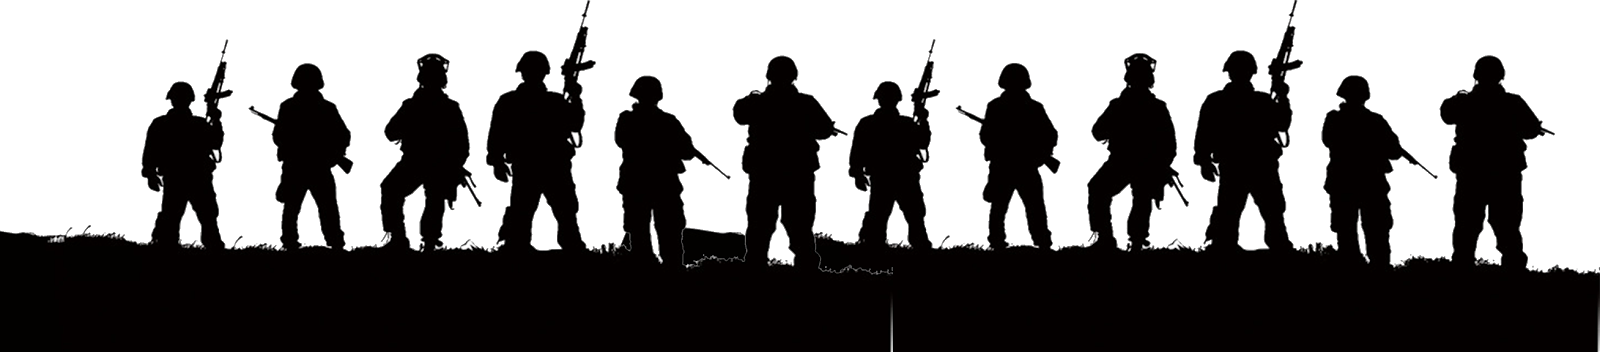 Free Military Silhouette Png Download Free Military Silhouette Png Png Images Free Cliparts On Clipart Library